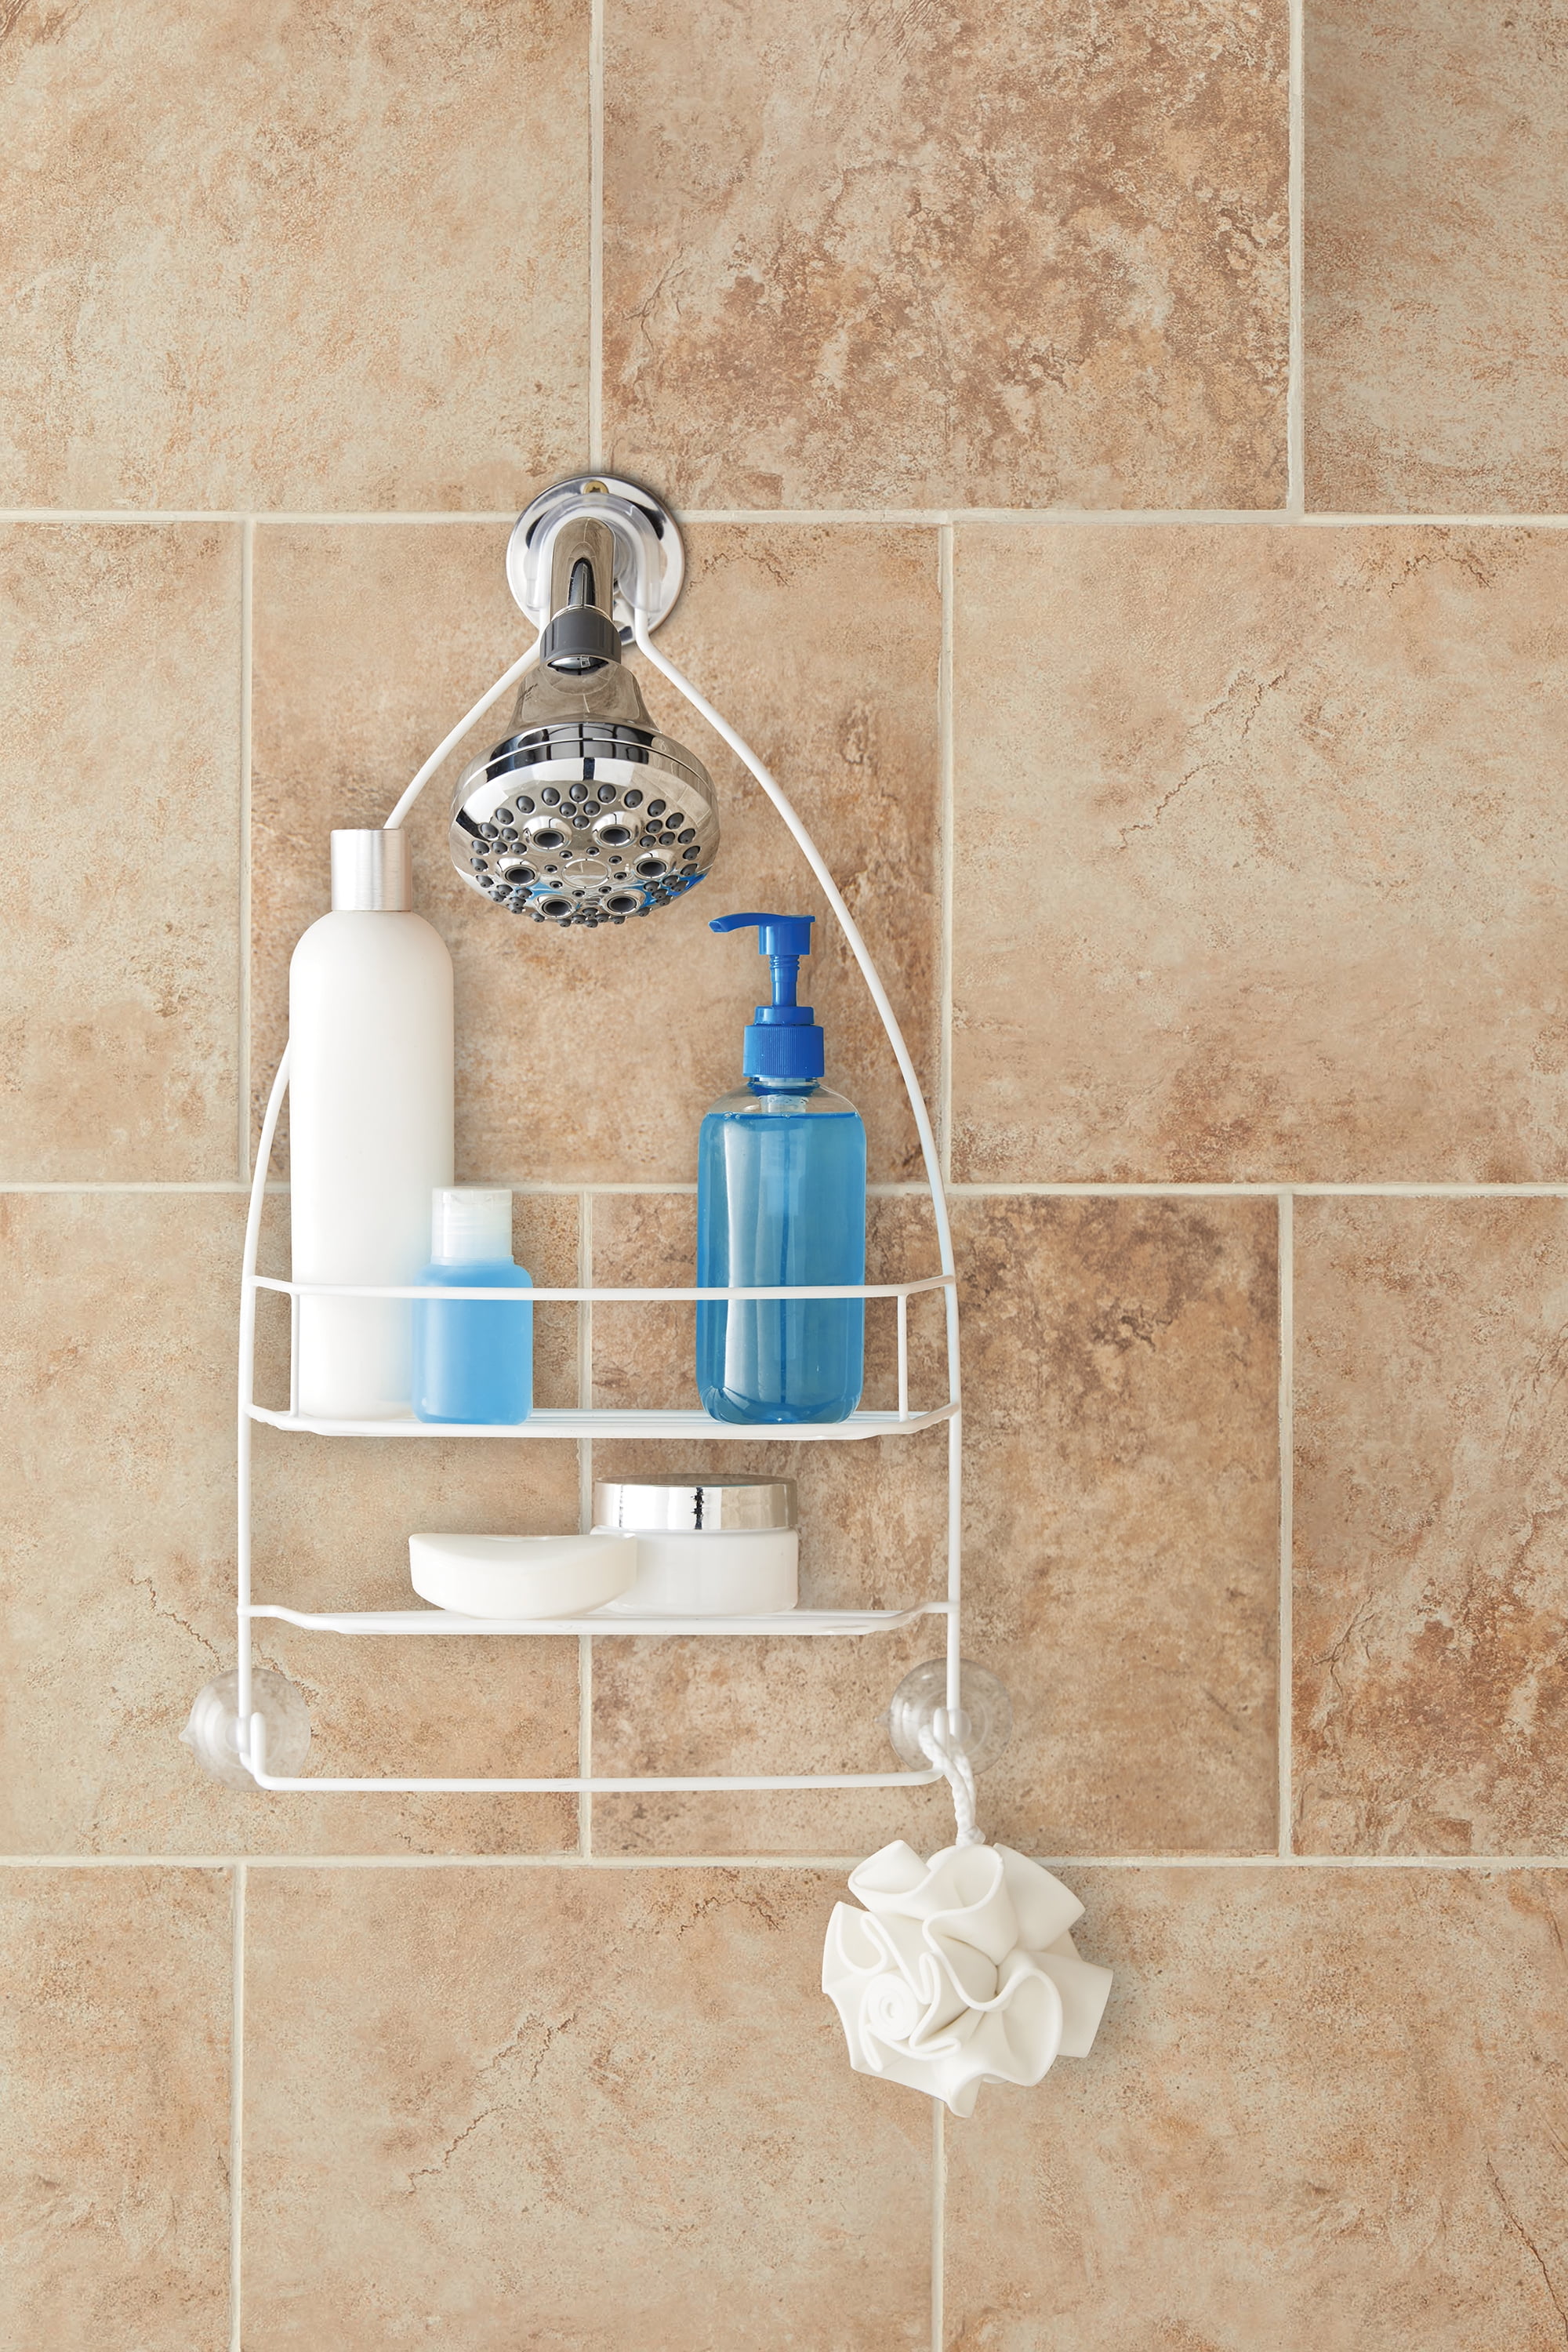 Mainstays Over-the-Shower Caddy with 1 Shelf - White - 1 Each